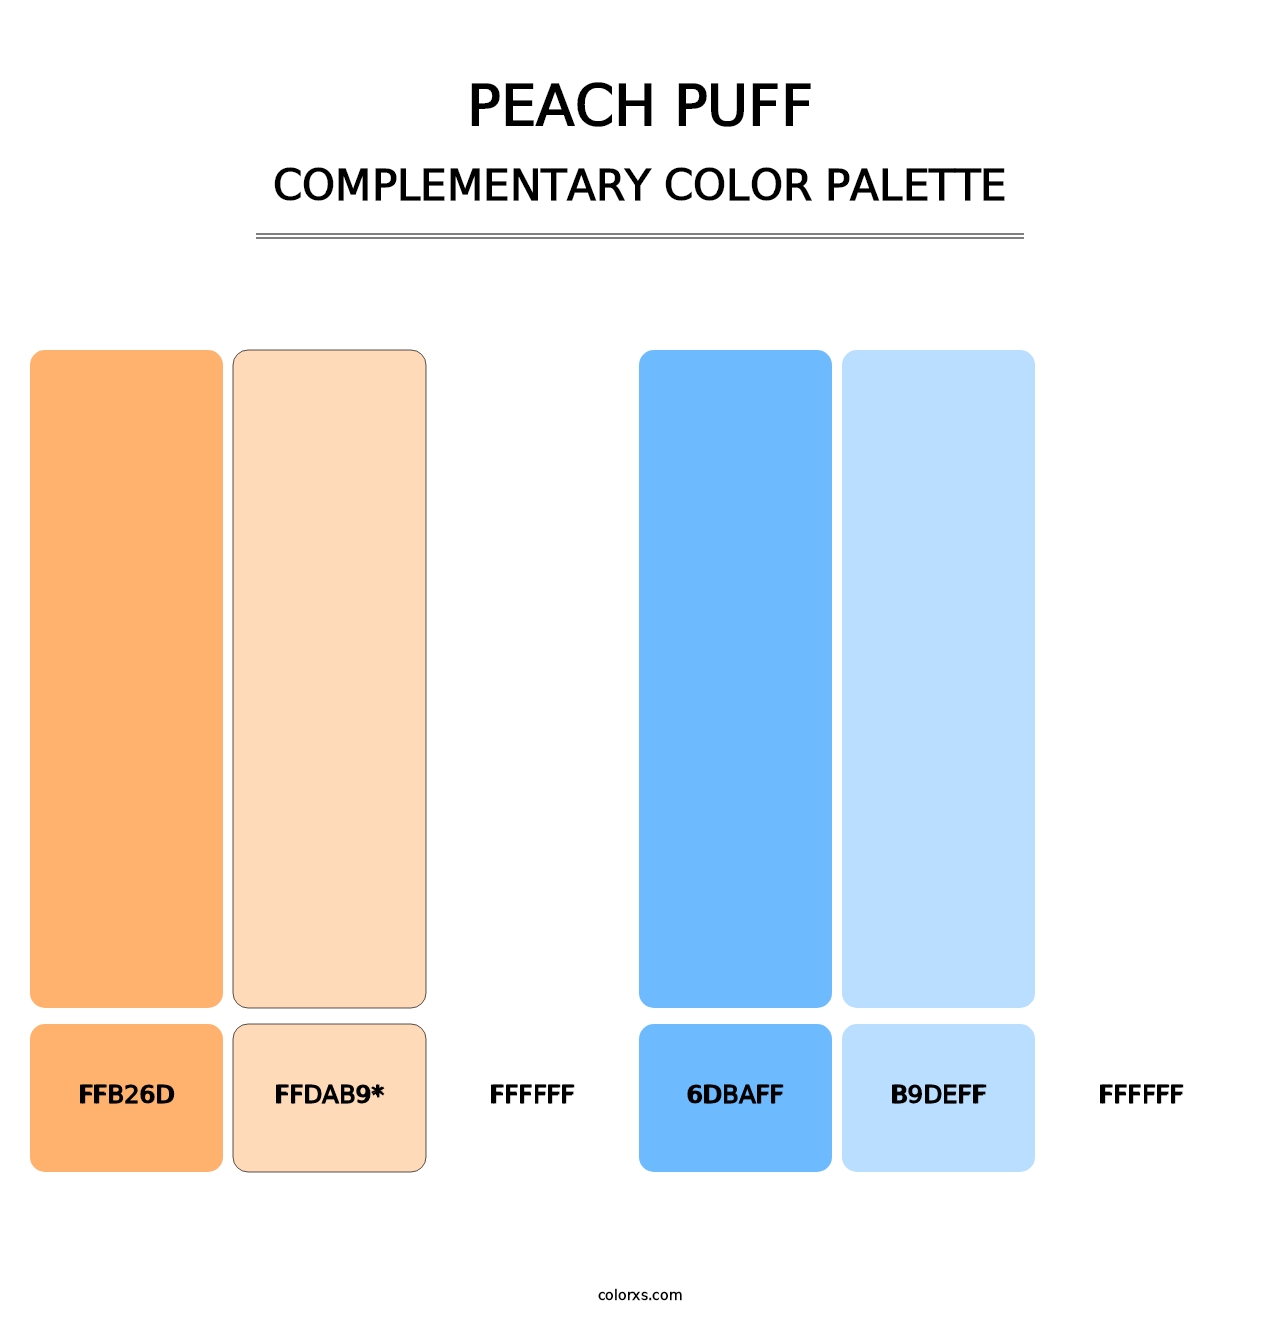 Peach Puff - Complementary Color Palette